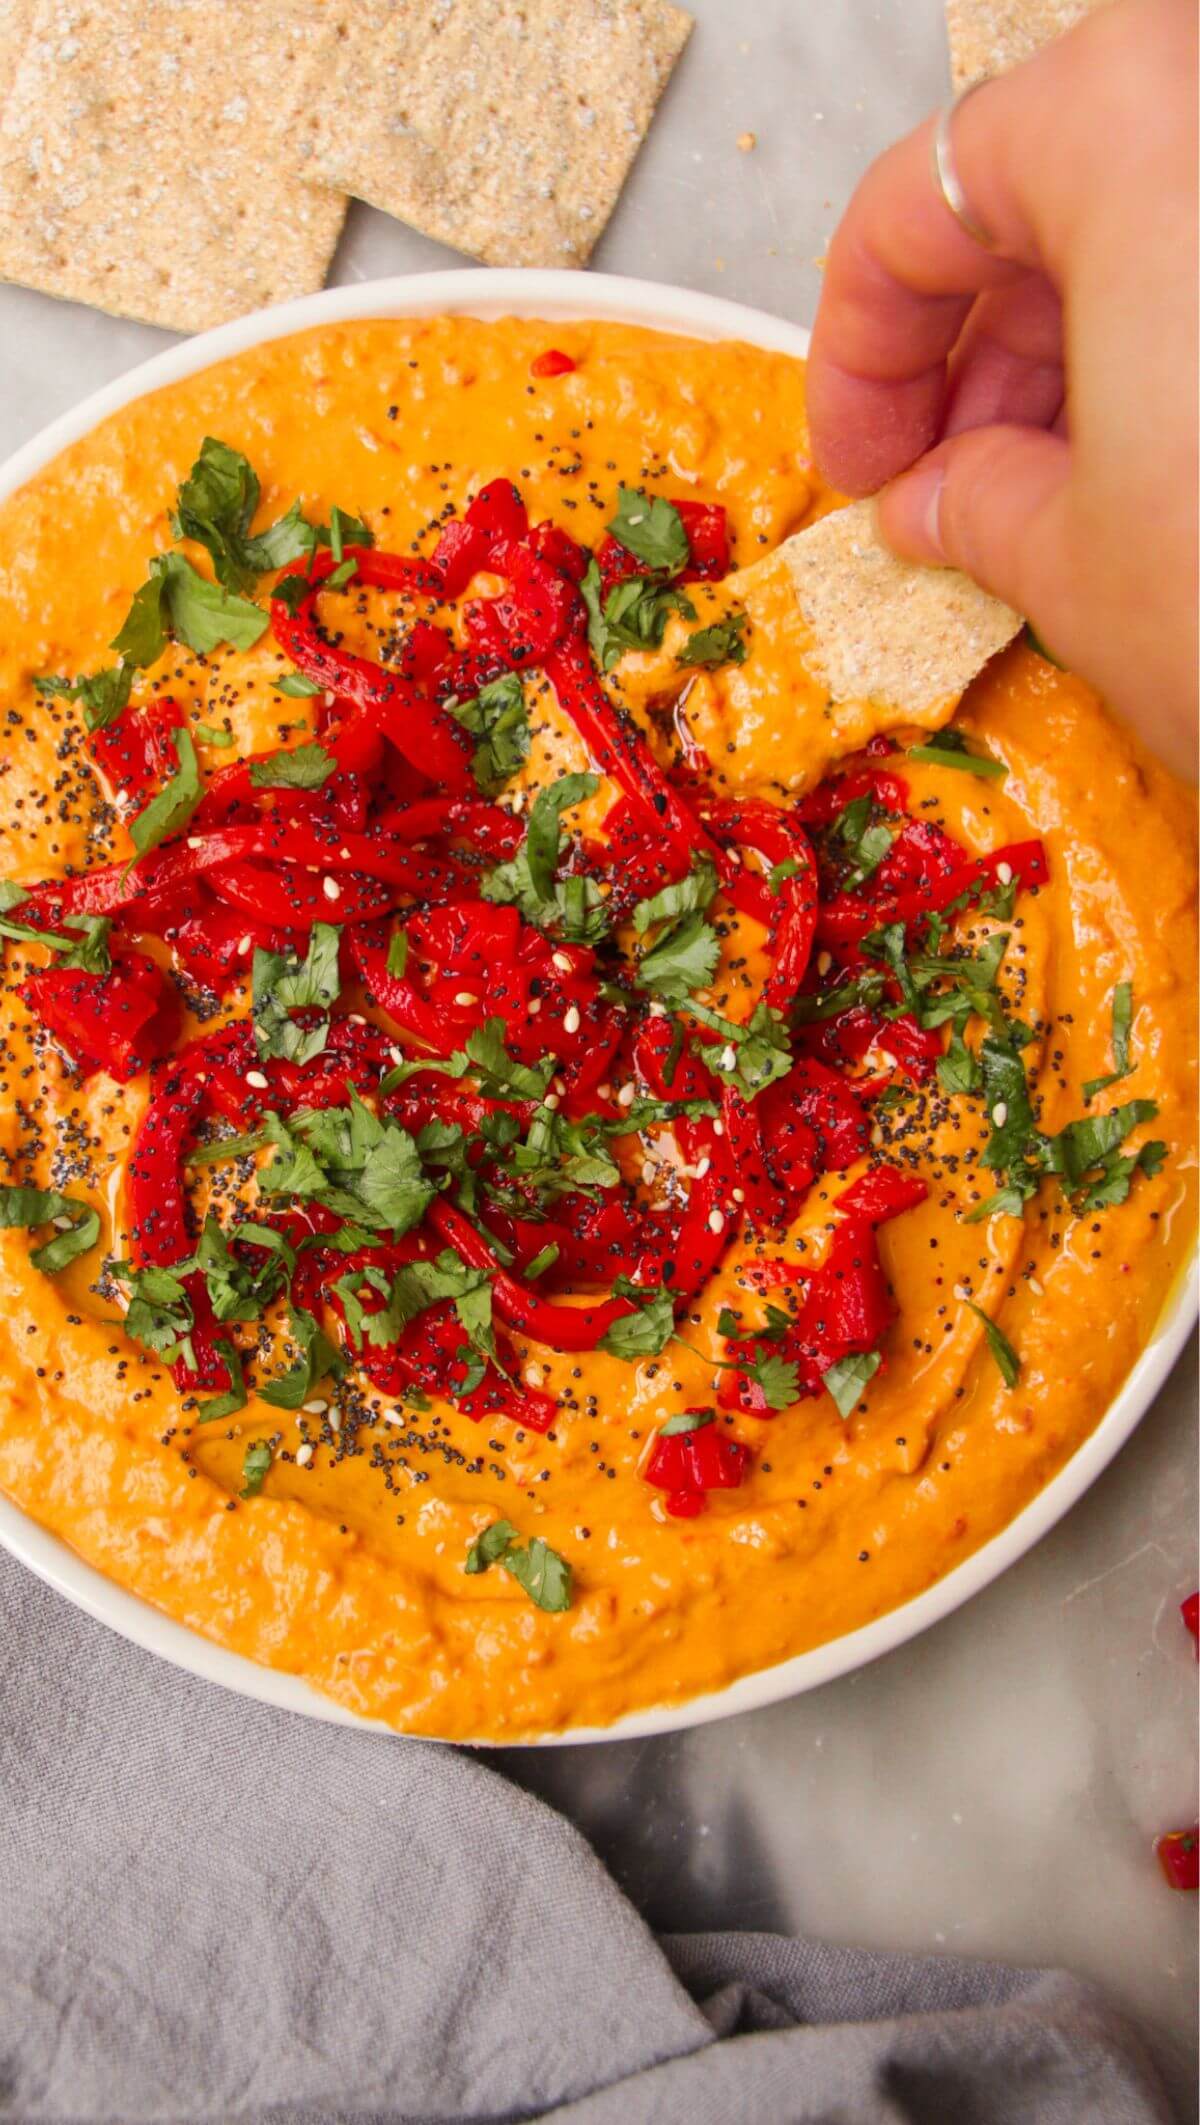 Hand scooping cracker in red pepper hummus on a white plate.